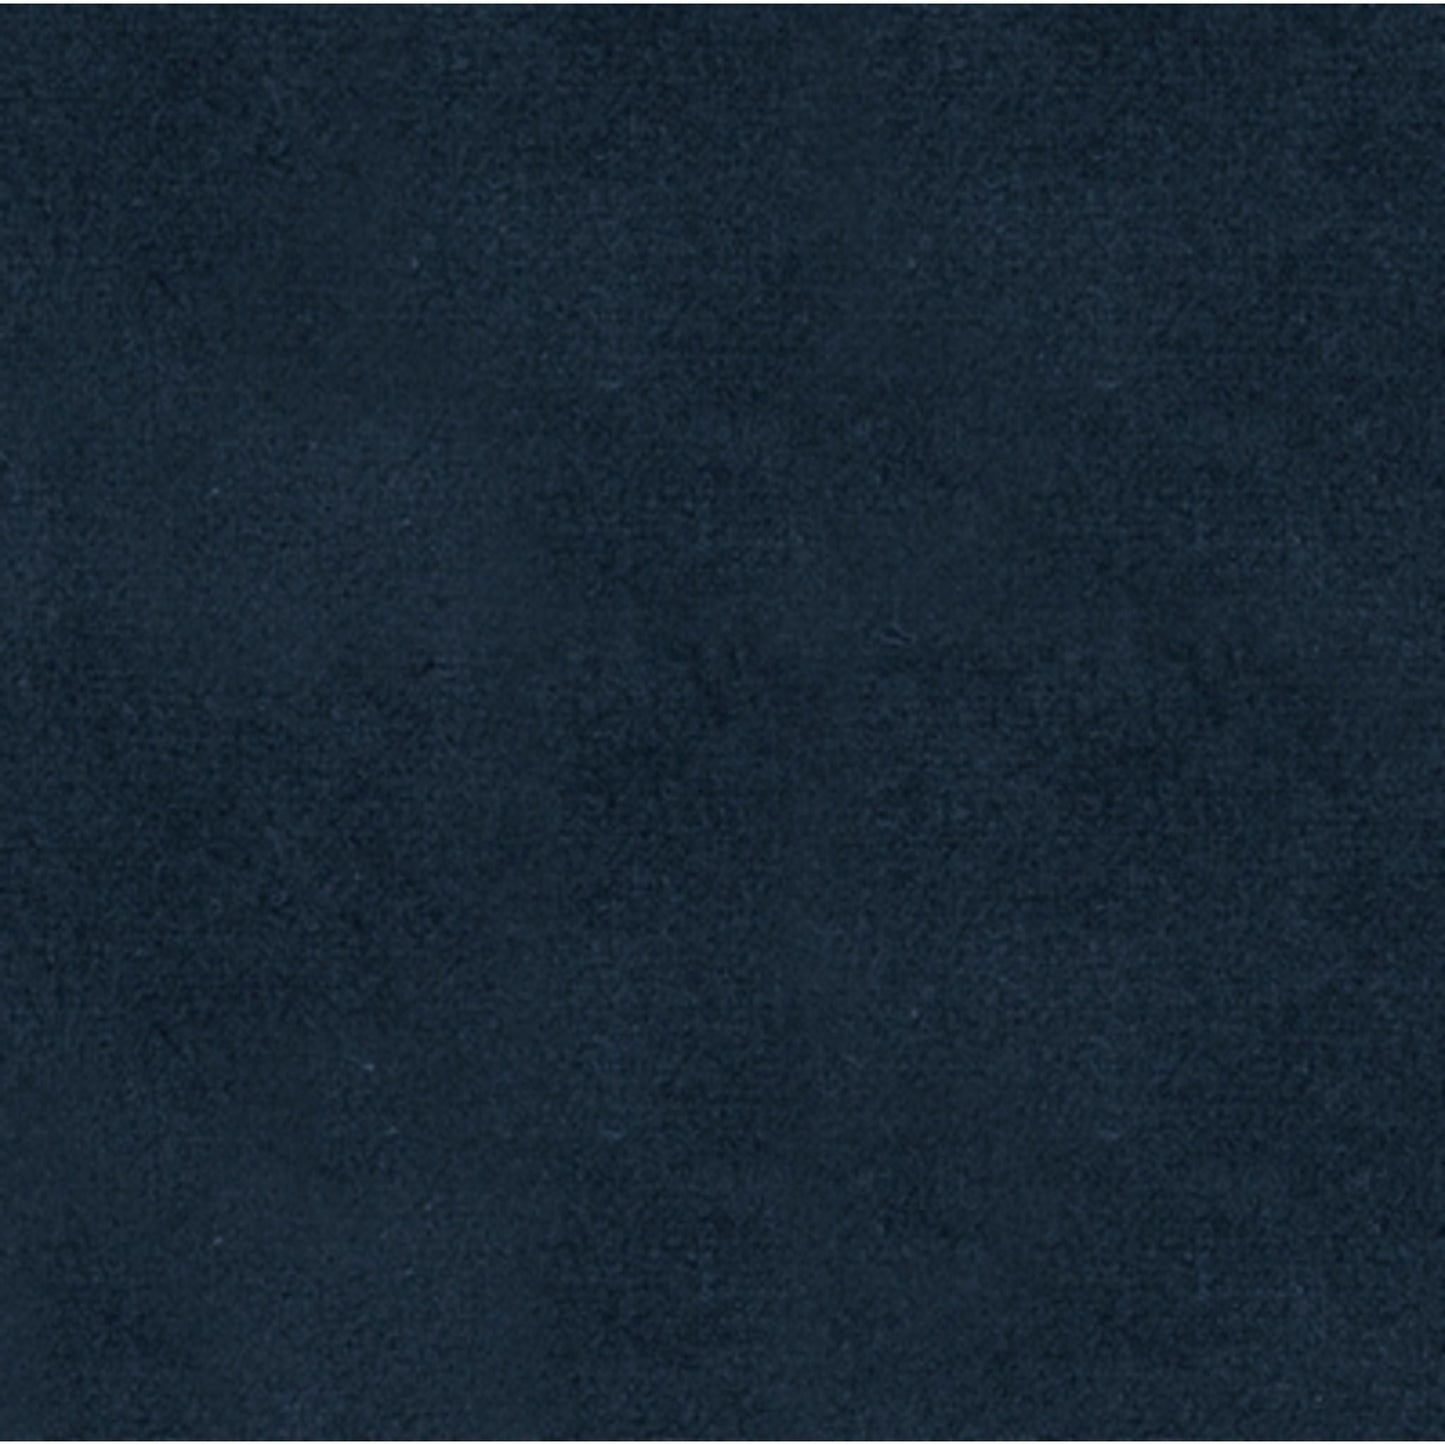 Macleary Ottoman - Navy